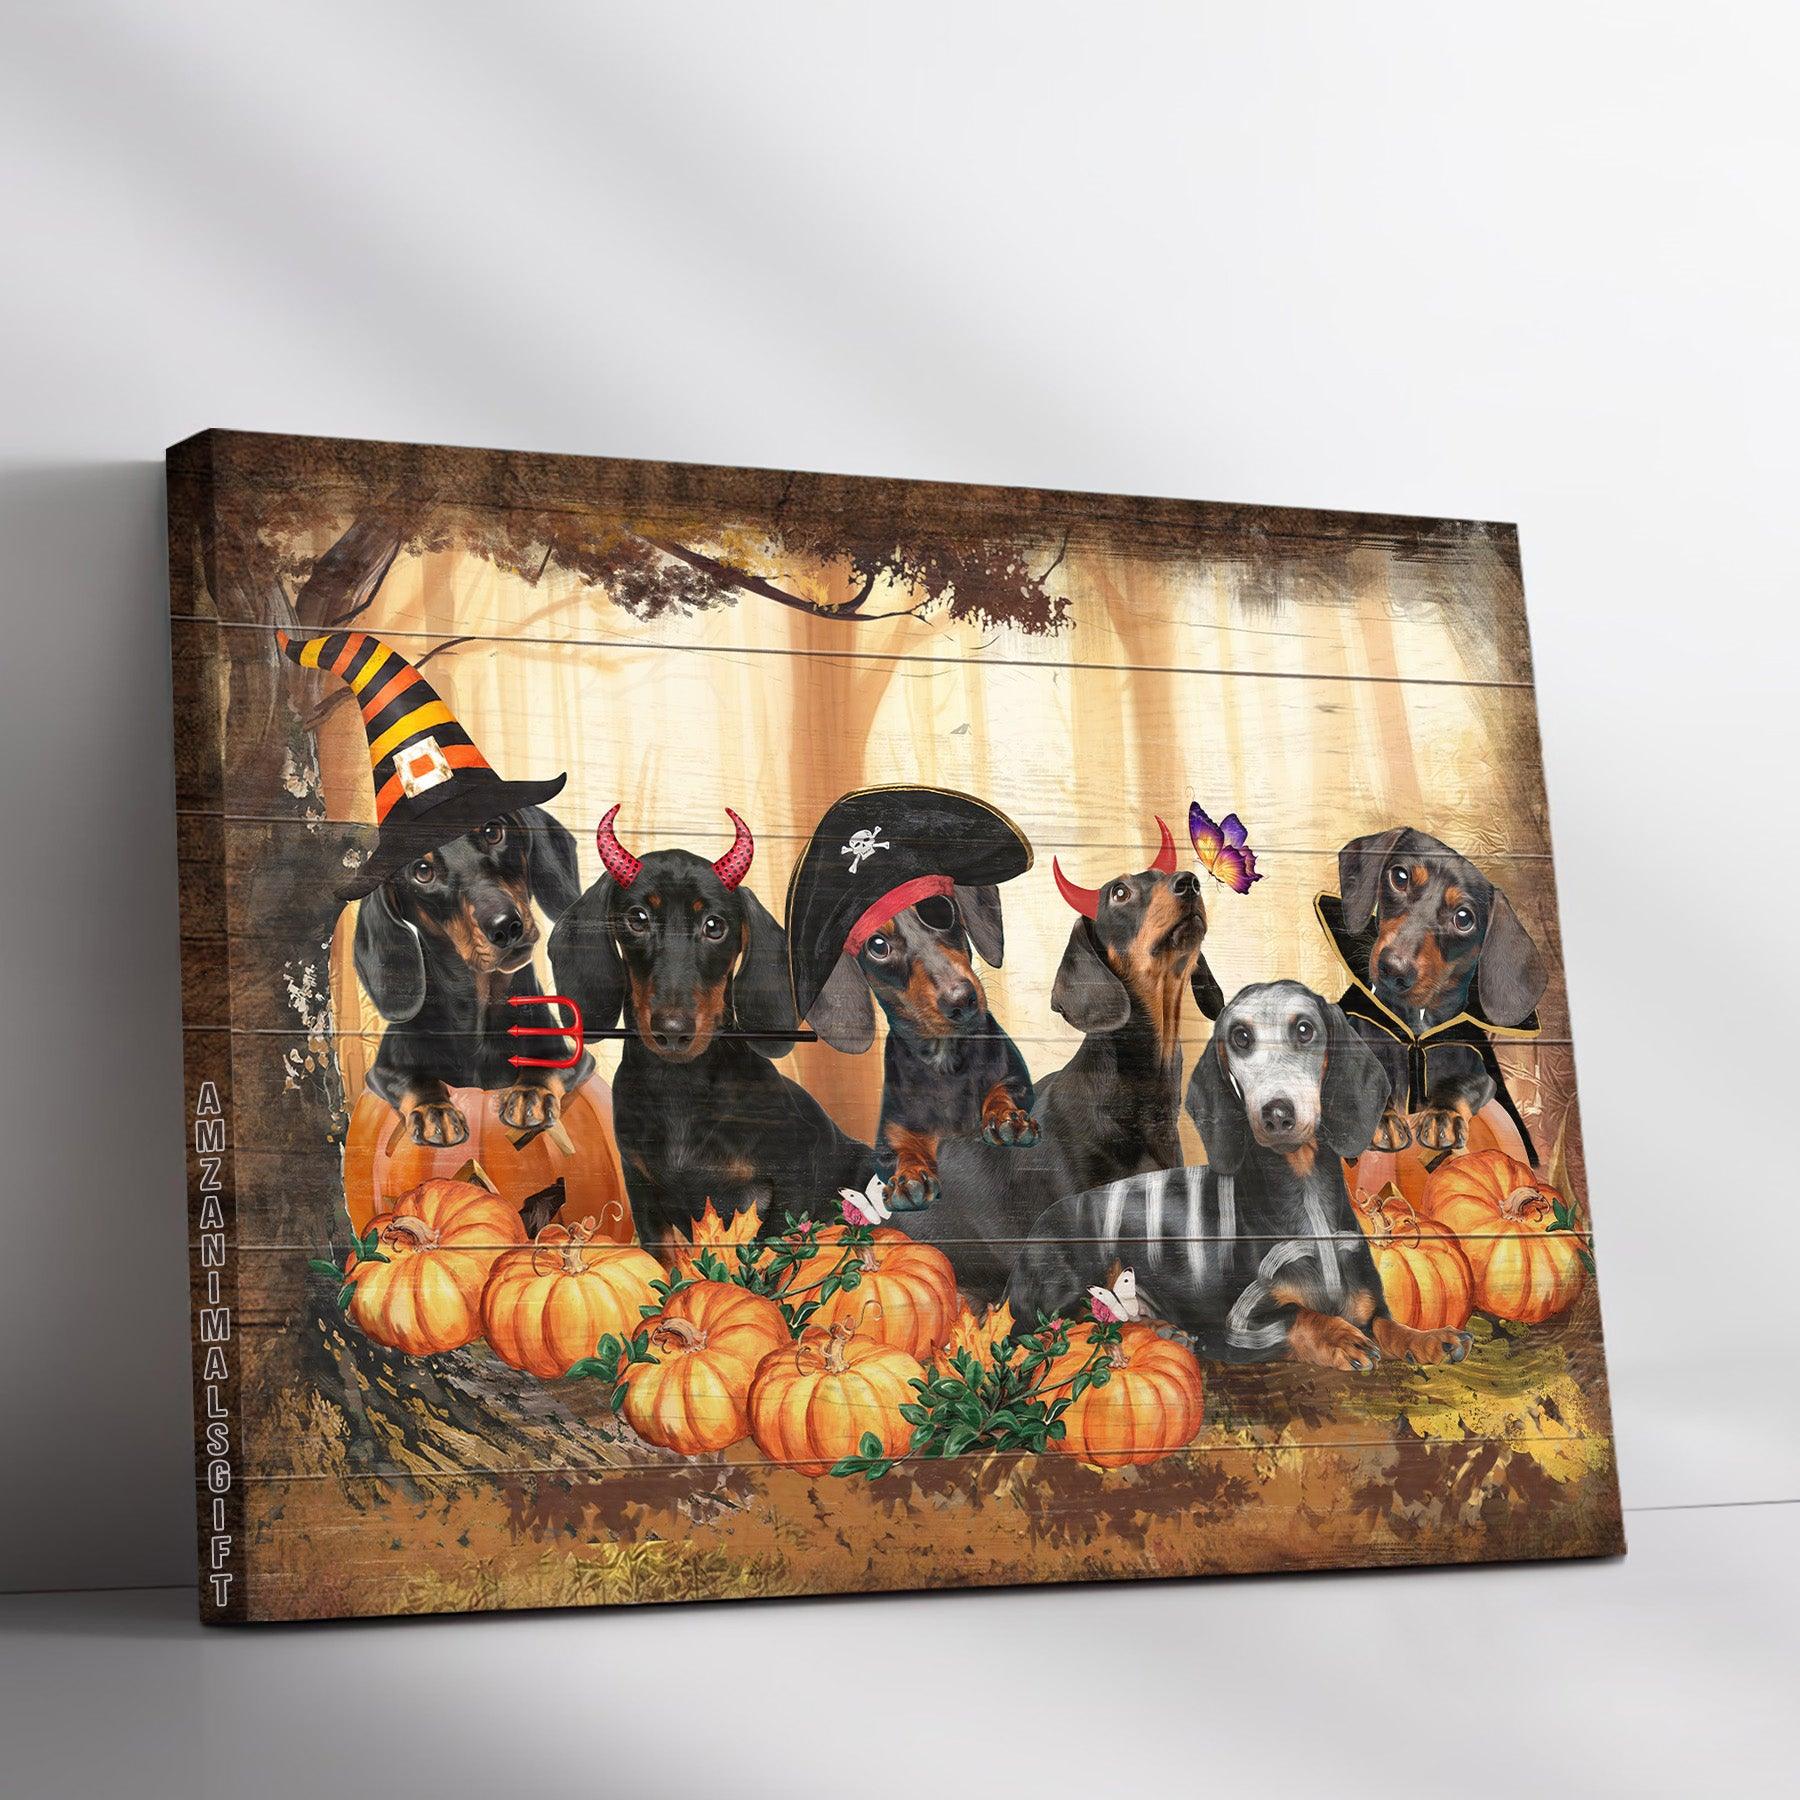 Dachshund Premium Wrapped Landscape Canvas - Dachshunds, Pumpkin, Halloween Costumes - Perfect Gift For Dachshund Lovers, Dog Lovers - Amzanimalsgift